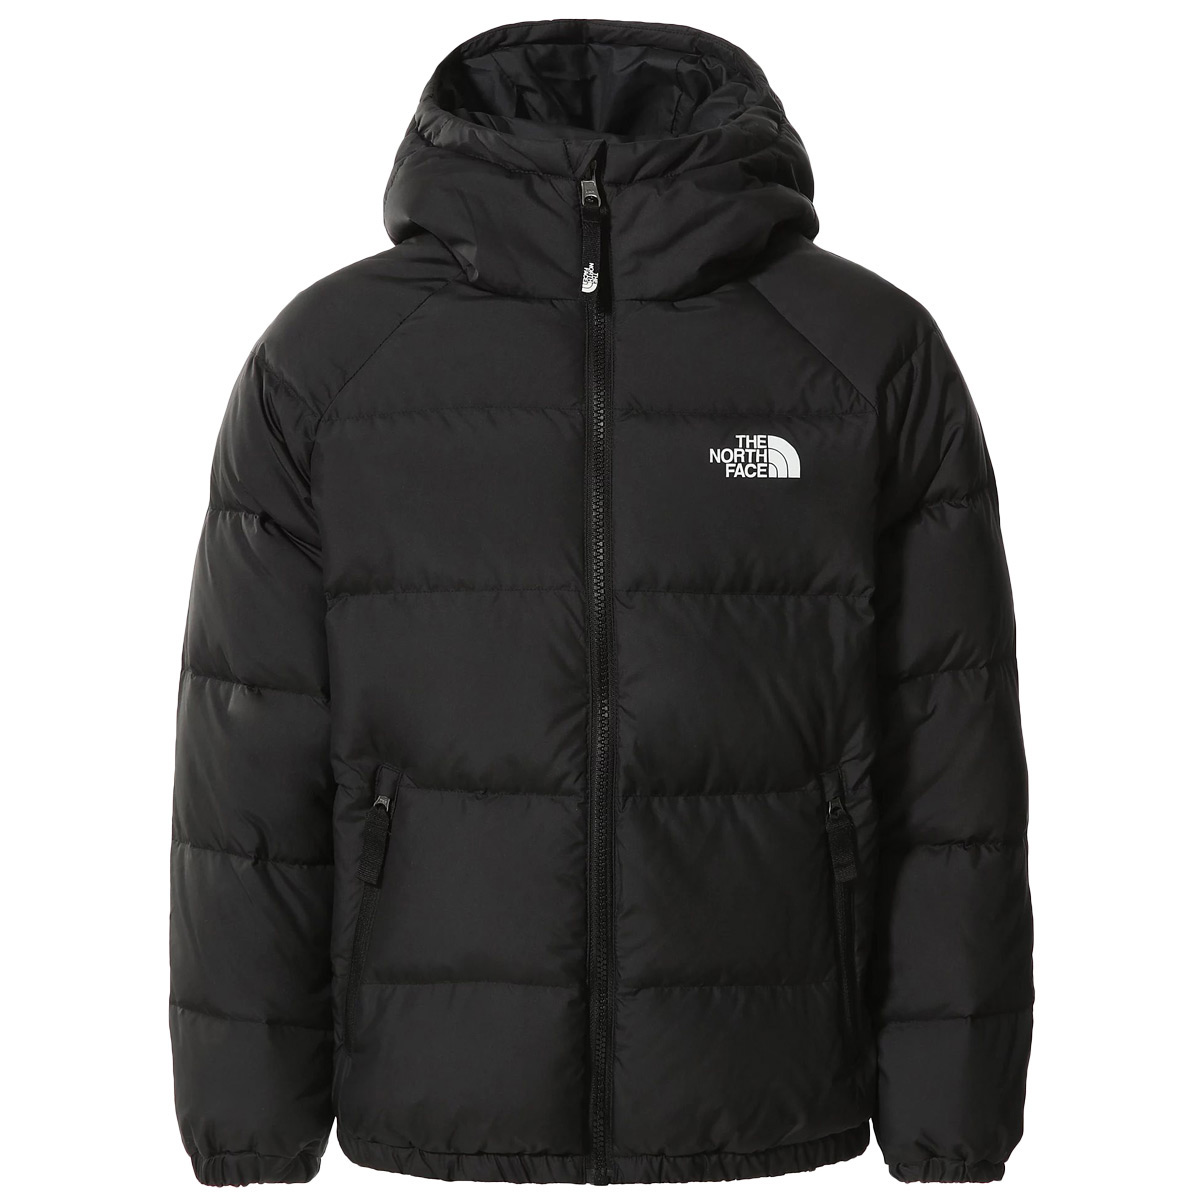 The North Face Boy's Hyalite Down Jacket Kids